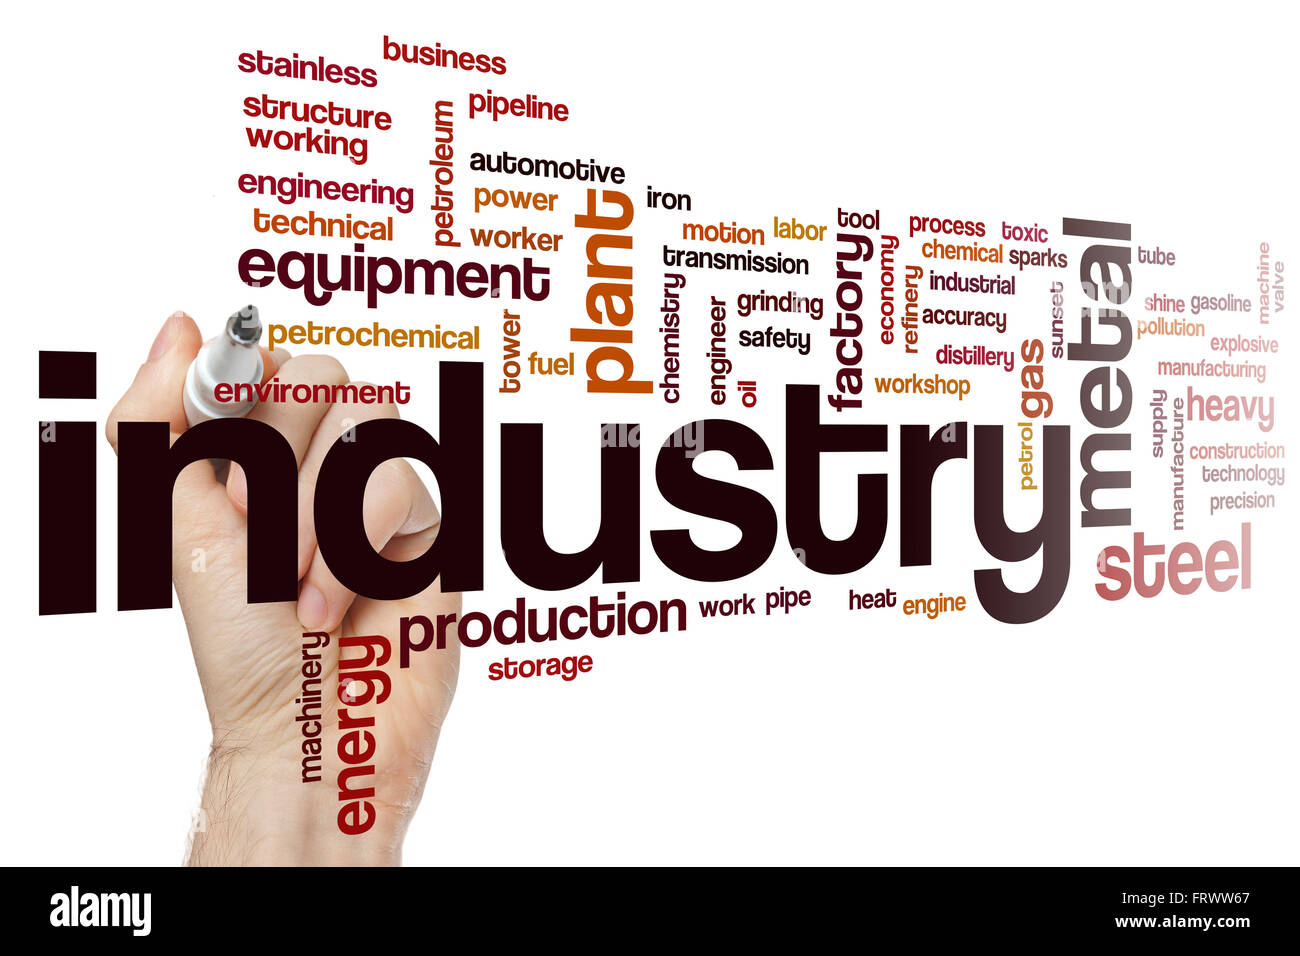 Industry word cloud Stock Photo